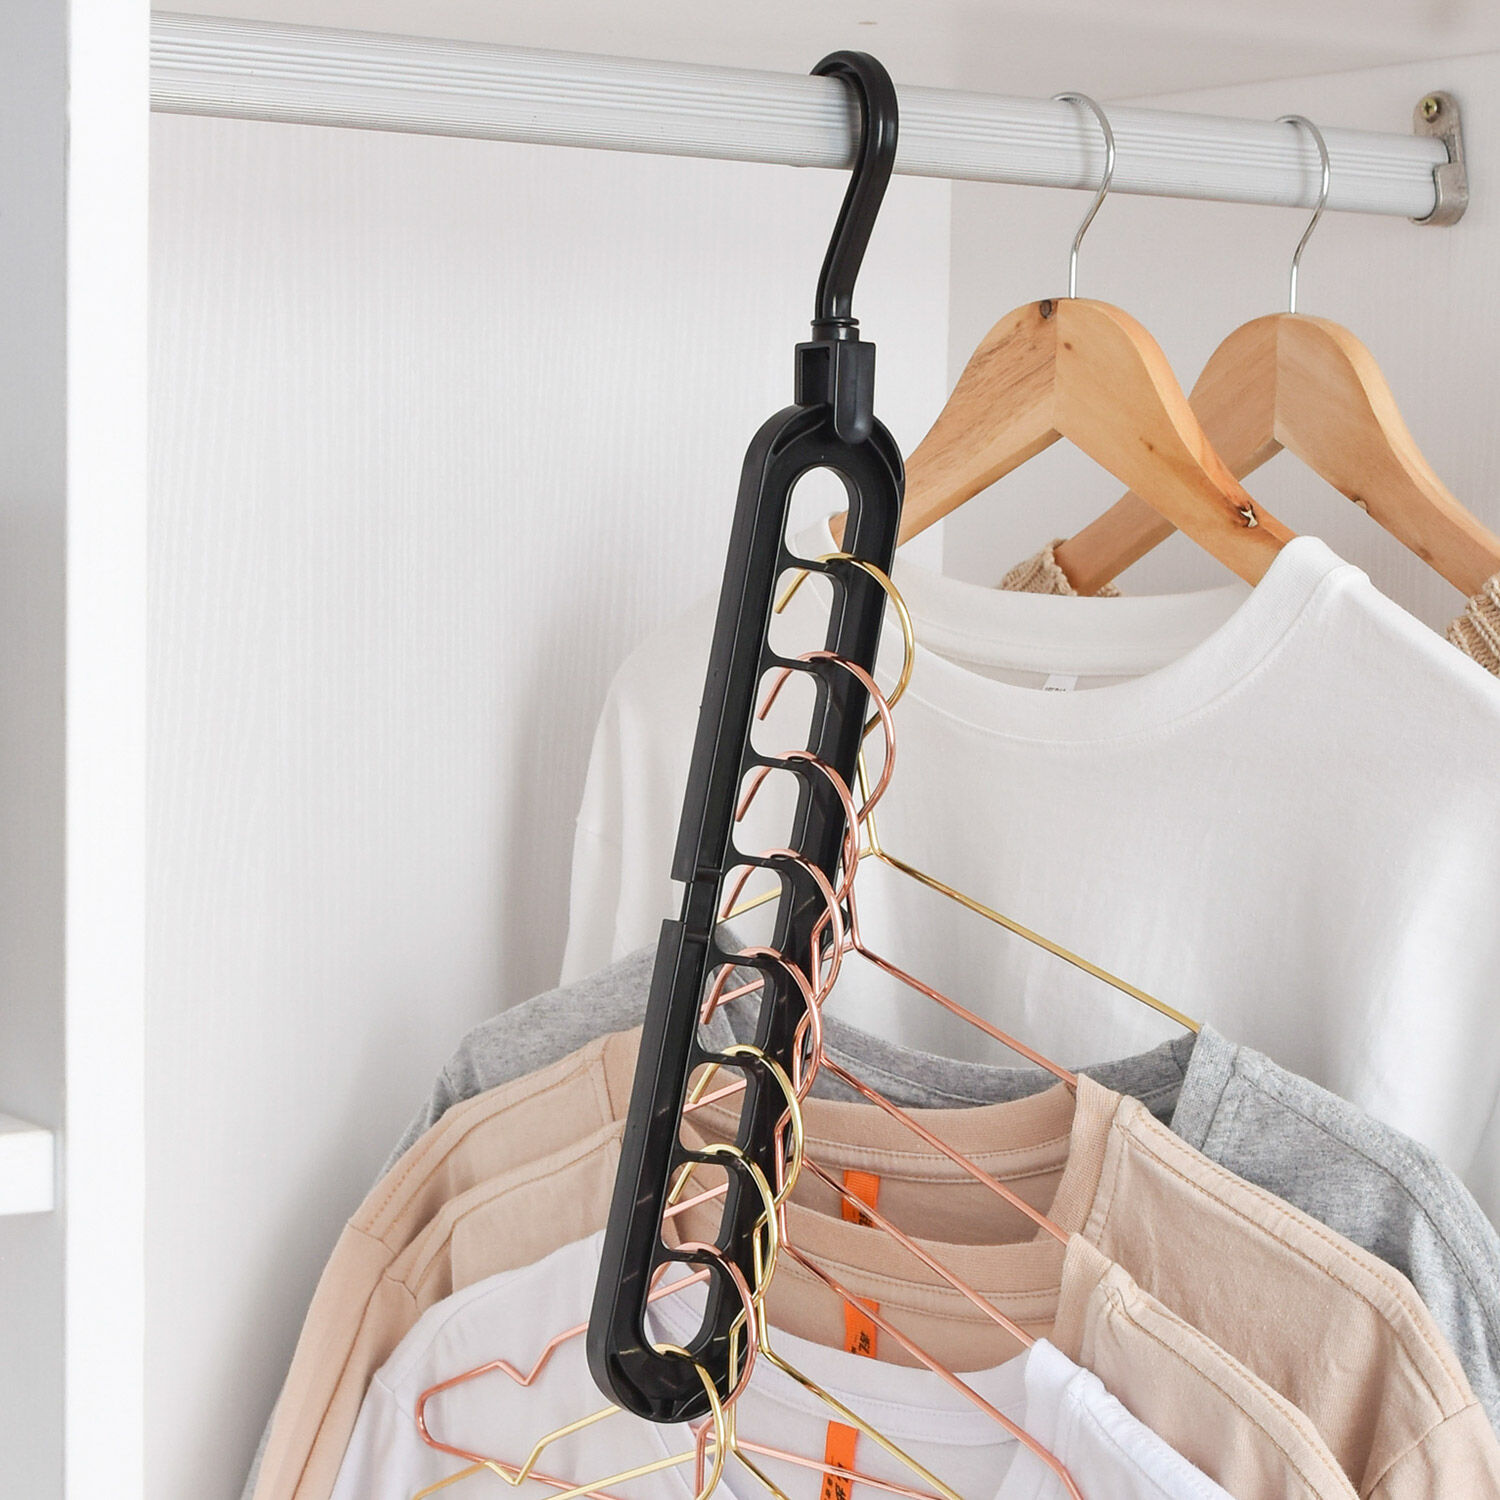 How to use: Space Saving Hanger, textile, clothing